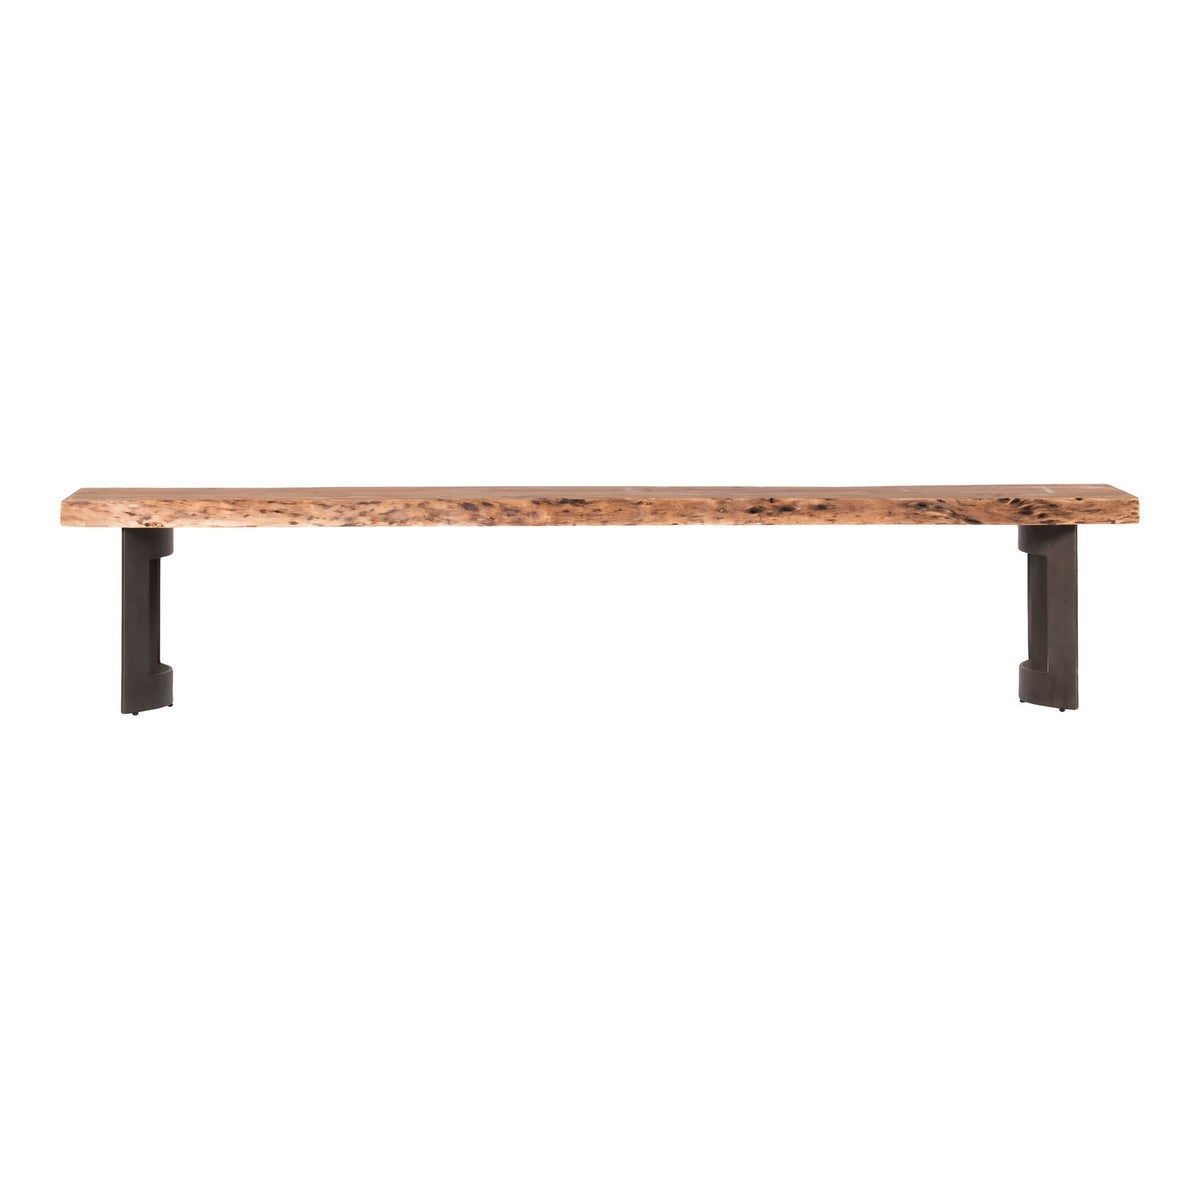 Moe's Home Collection Bent Bench Extra Small Smoked - VE-1038-03 - Moe's Home Collection - Benches - Minimal And Modern - 1